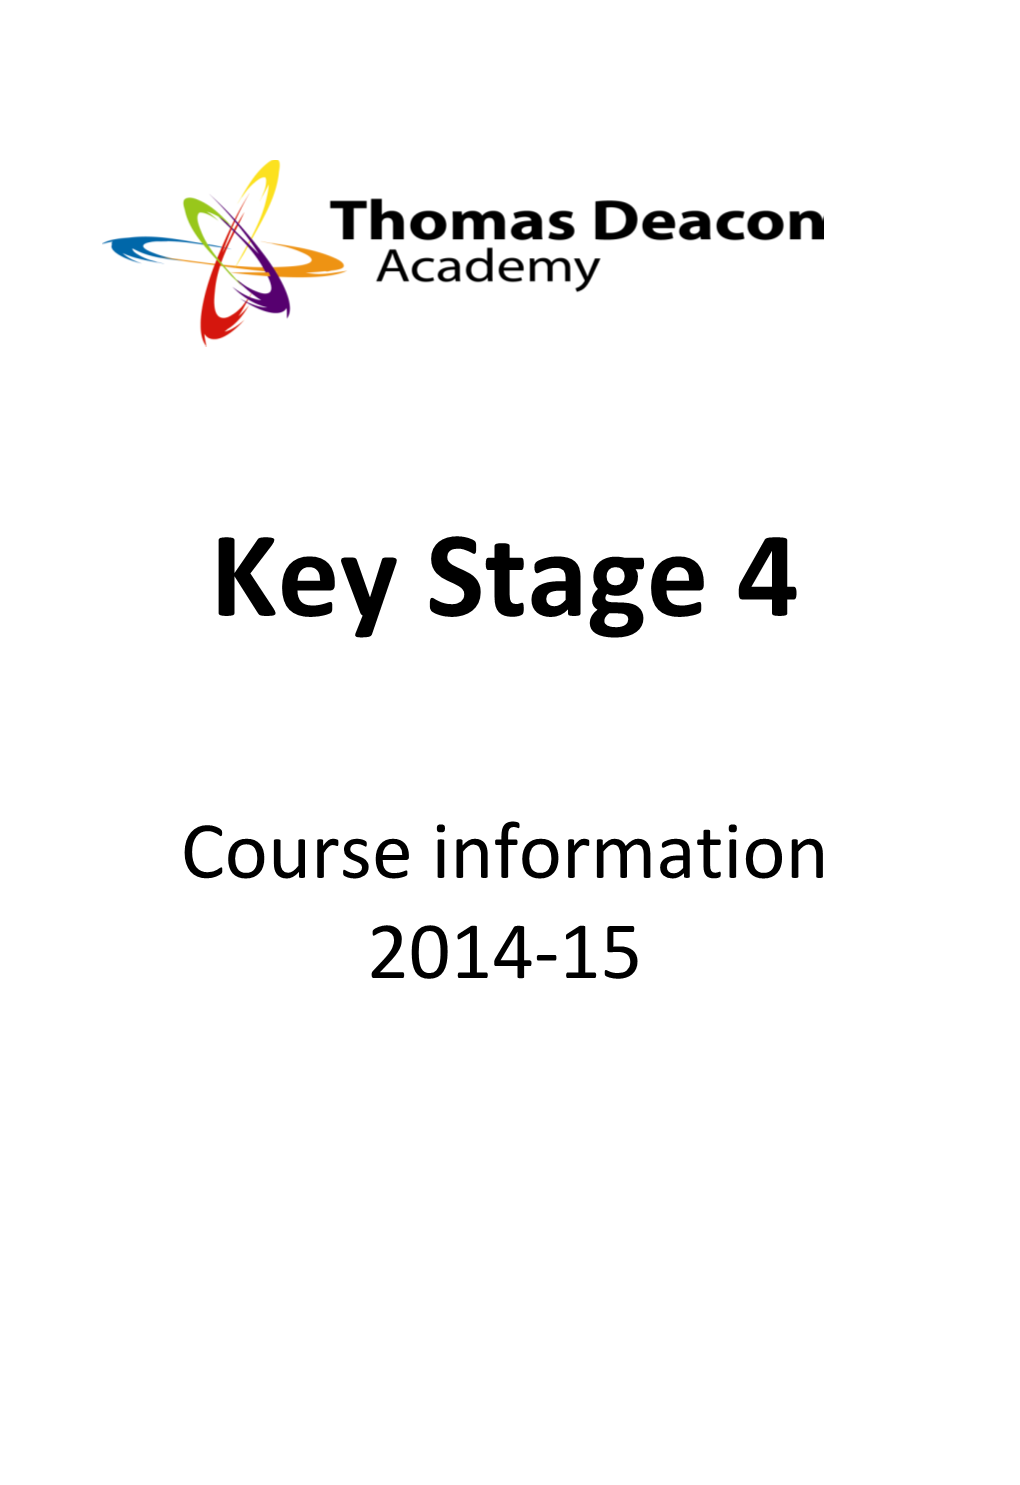 Course Information 2014-15